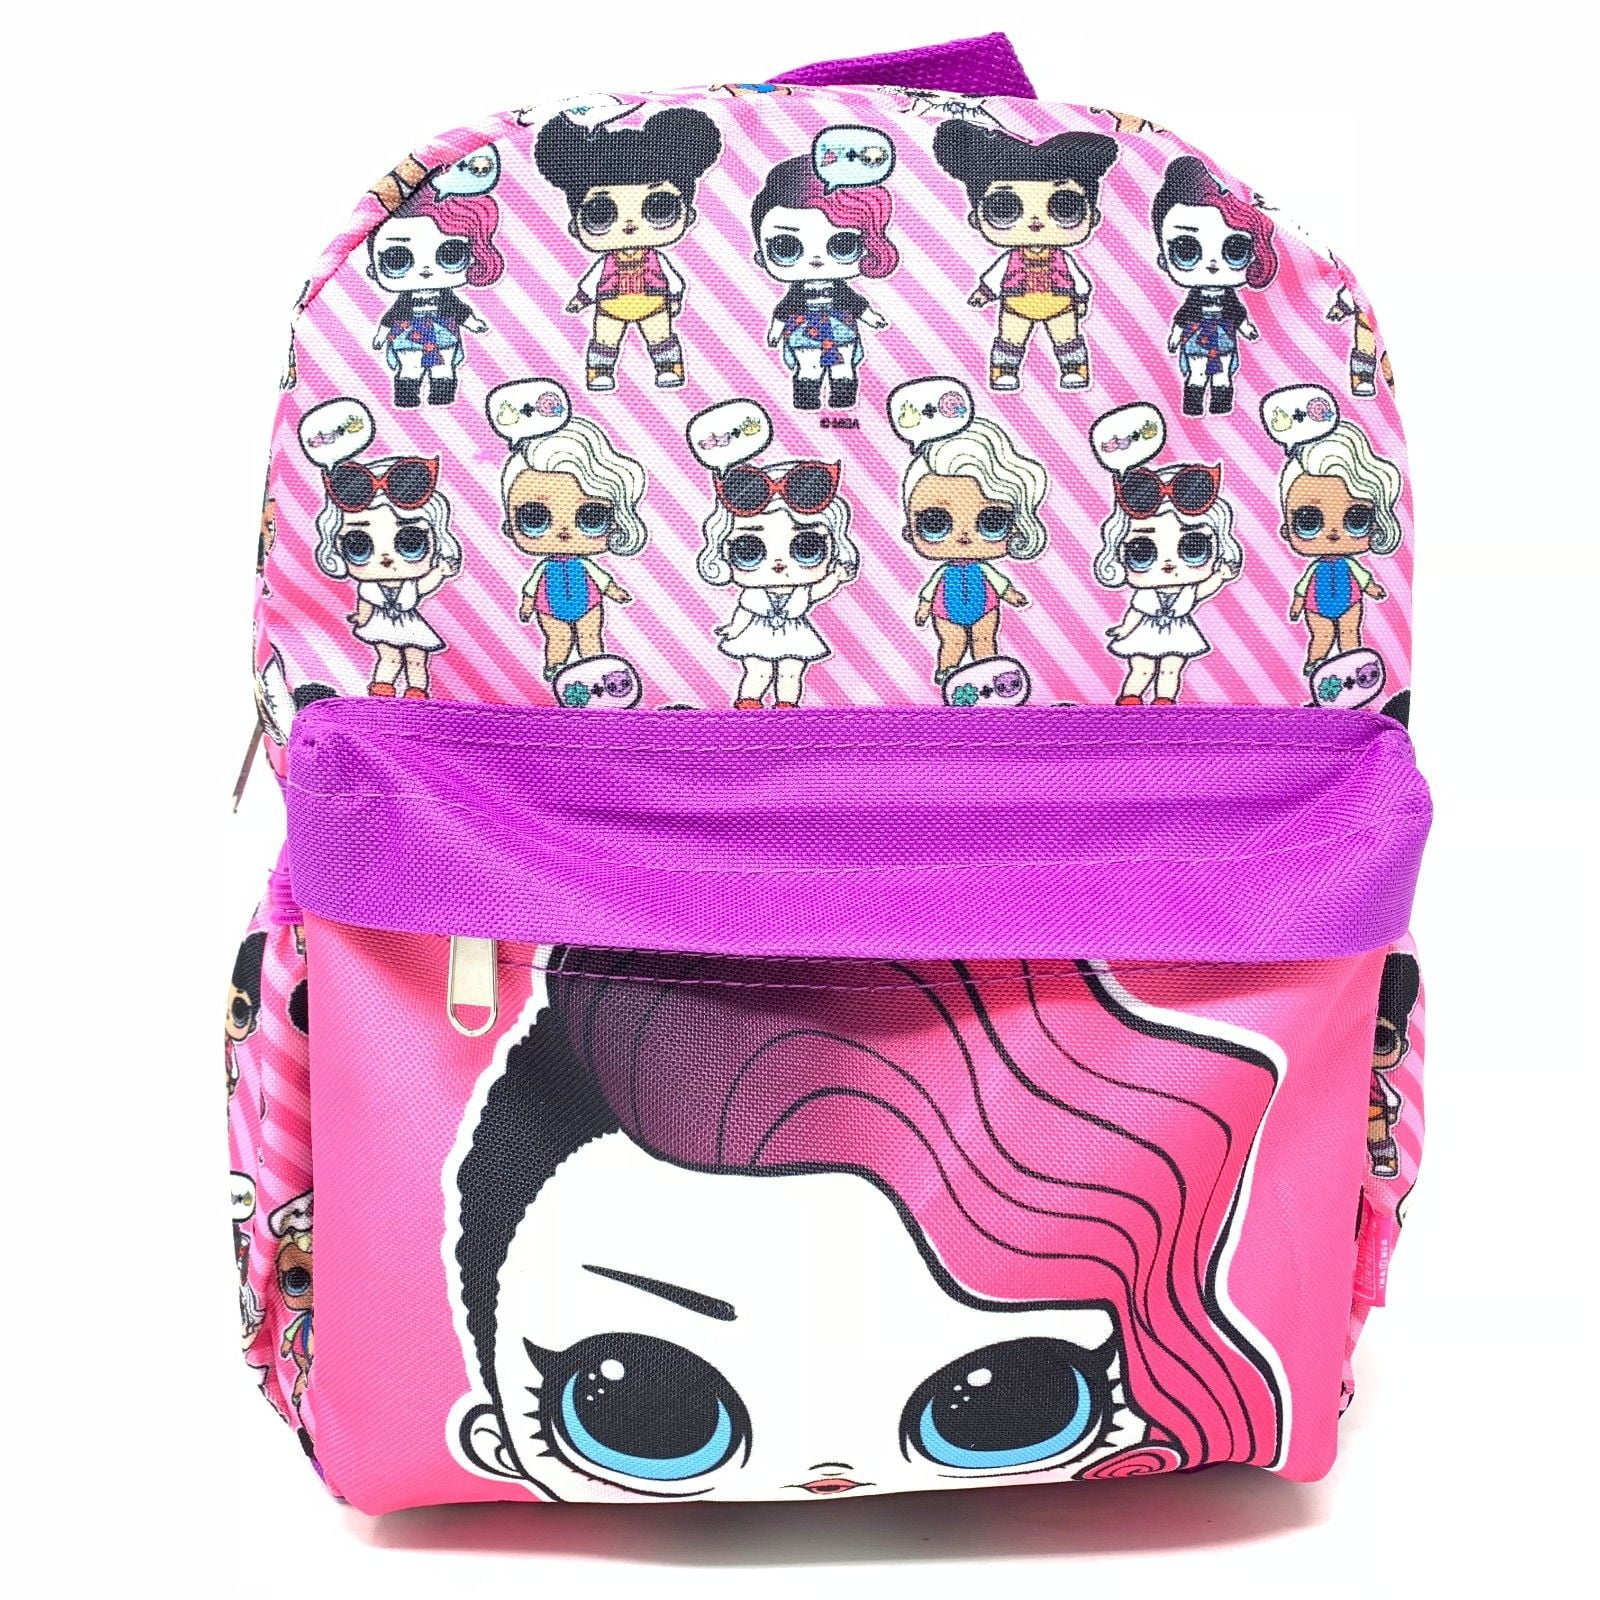 LOL Surprise! Small 12" Pink All-Over Print Girls' School Backpack-TODDLER